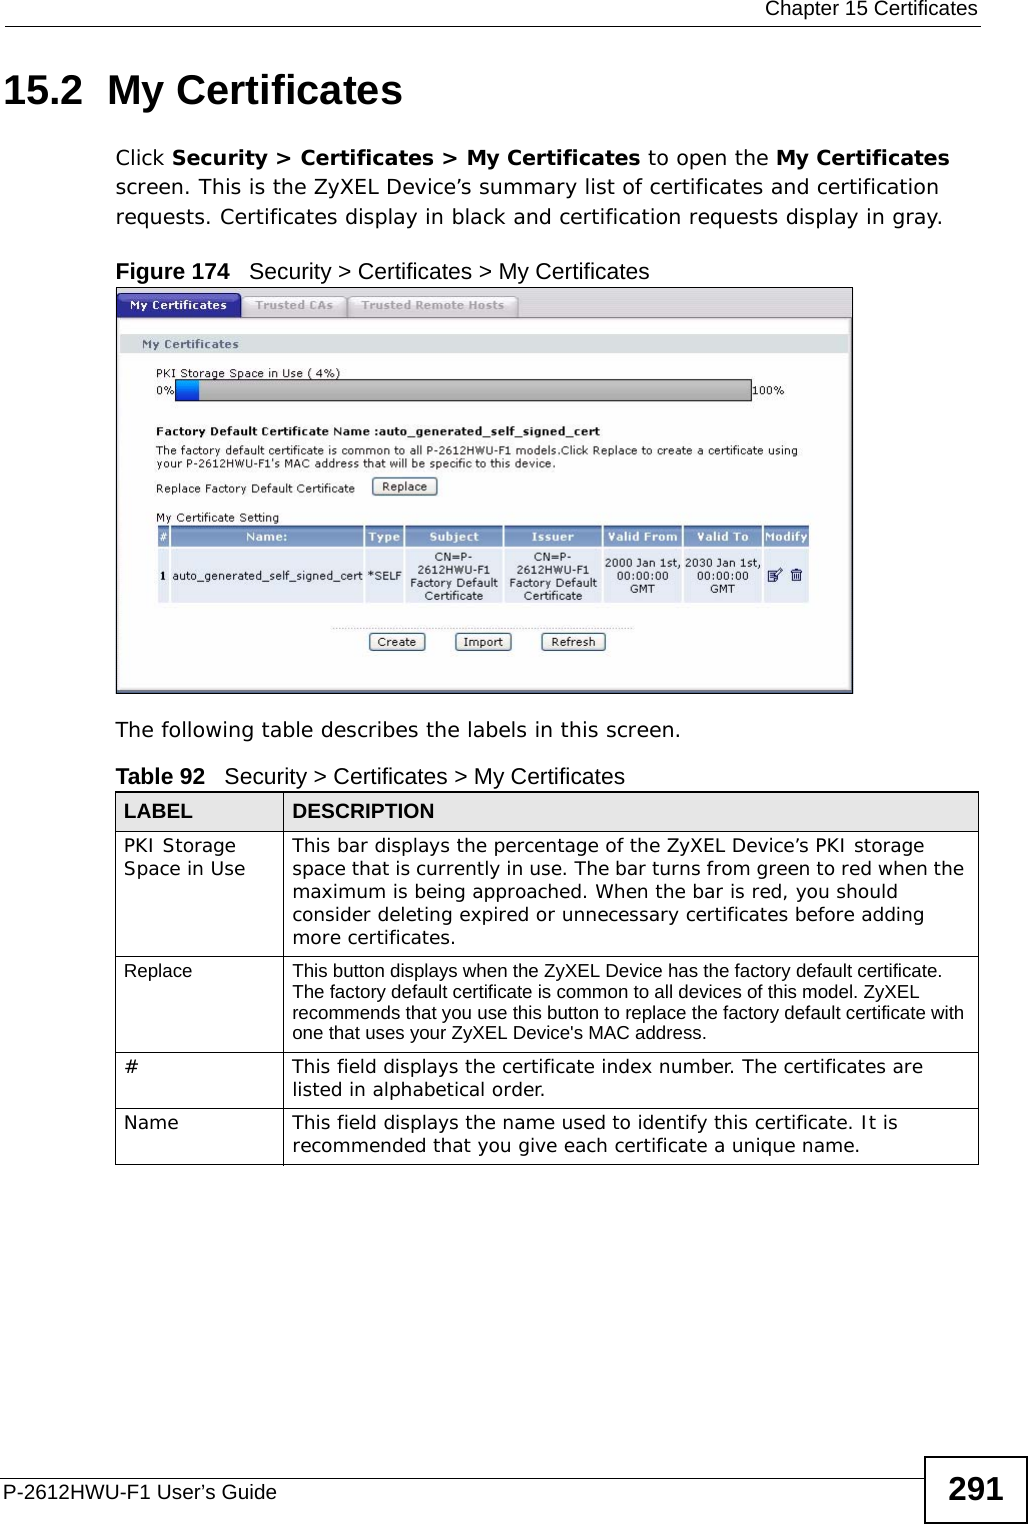  Chapter 15 CertificatesP-2612HWU-F1 User’s Guide 29115.2  My CertificatesClick Security &gt; Certificates &gt; My Certificates to open the My Certificates screen. This is the ZyXEL Device’s summary list of certificates and certification requests. Certificates display in black and certification requests display in gray.Figure 174   Security &gt; Certificates &gt; My Certificates  The following table describes the labels in this screen. Table 92   Security &gt; Certificates &gt; My CertificatesLABEL DESCRIPTIONPKI Storage Space in Use This bar displays the percentage of the ZyXEL Device’s PKI storage space that is currently in use. The bar turns from green to red when the maximum is being approached. When the bar is red, you should consider deleting expired or unnecessary certificates before adding more certificates.Replace This button displays when the ZyXEL Device has the factory default certificate. The factory default certificate is common to all devices of this model. ZyXEL recommends that you use this button to replace the factory default certificate with one that uses your ZyXEL Device&apos;s MAC address.# This field displays the certificate index number. The certificates are listed in alphabetical order. Name This field displays the name used to identify this certificate. It is recommended that you give each certificate a unique name. 